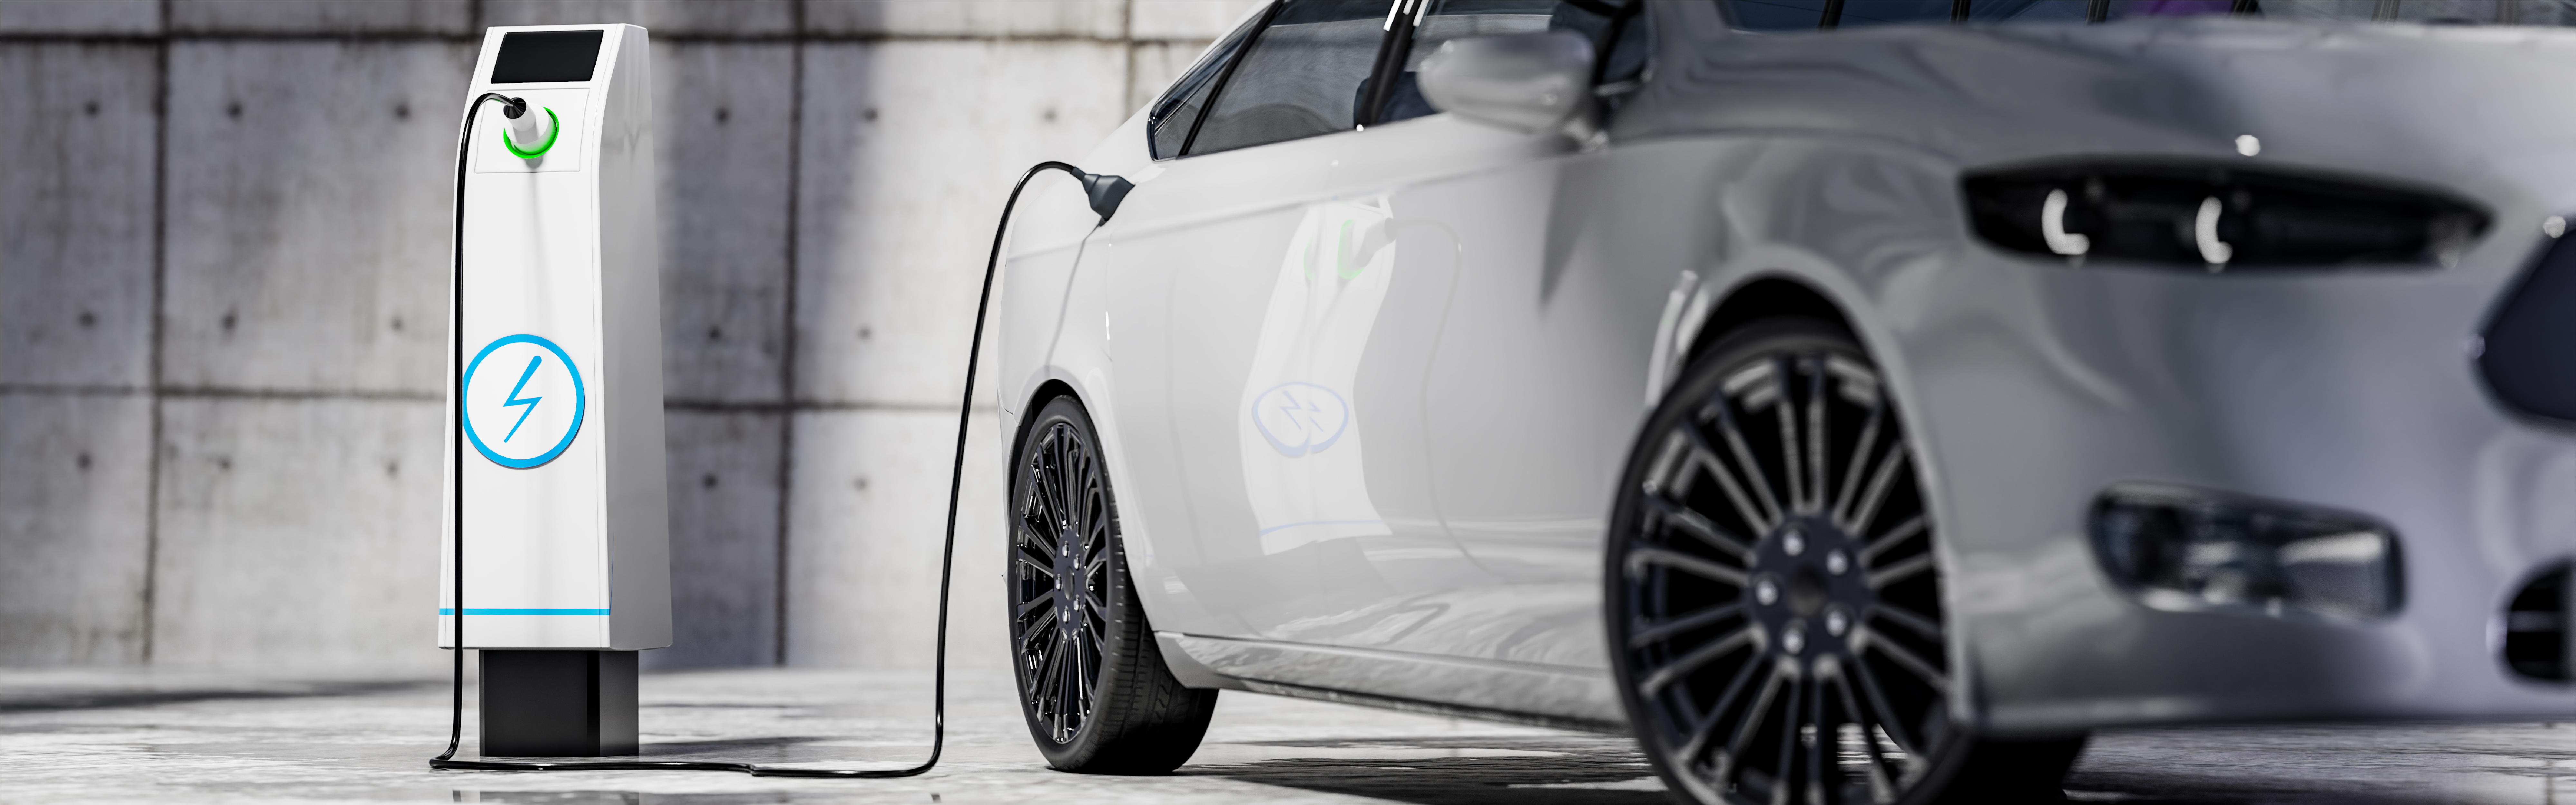 EV Chargers Banner Image - 1920 x 600.png